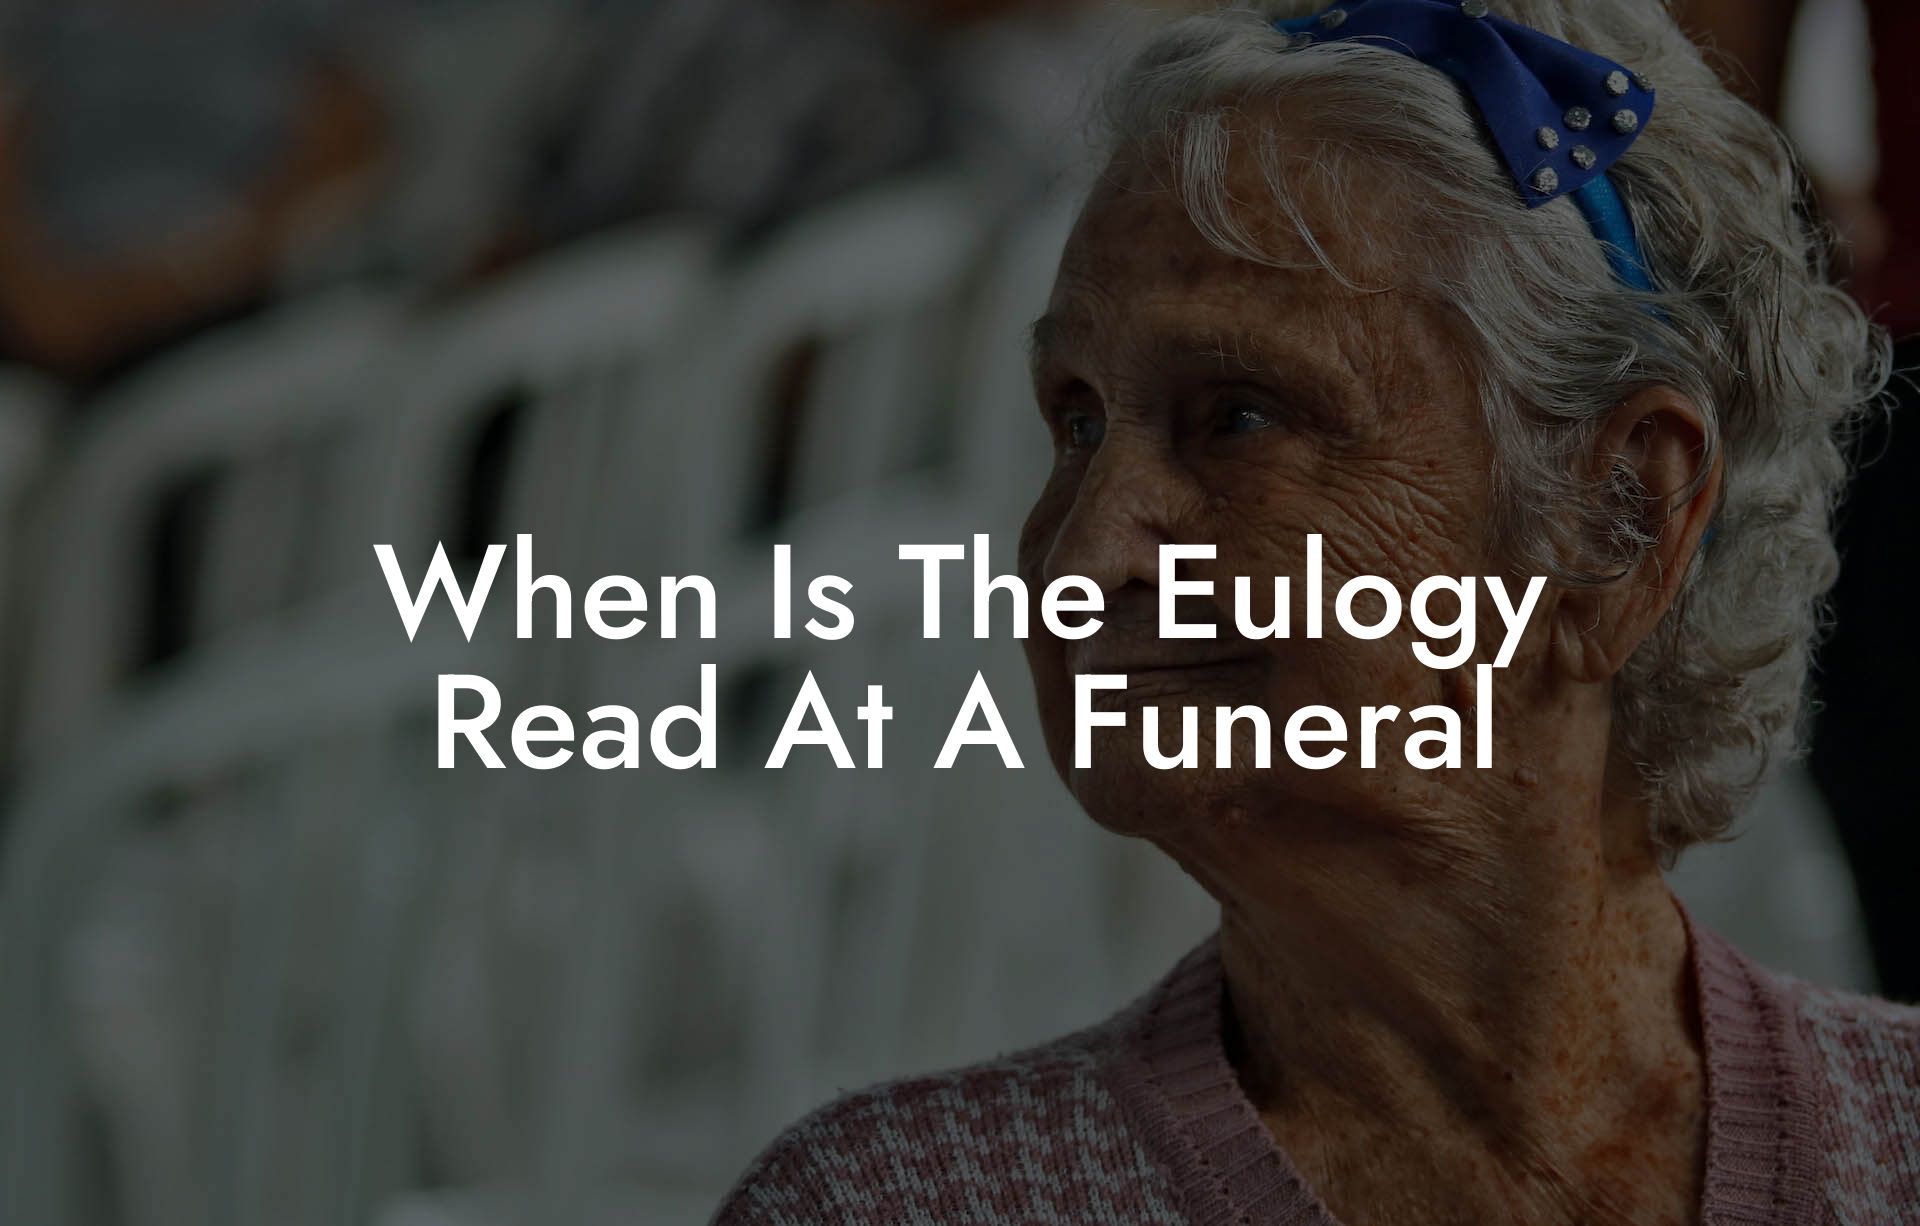 When Is The Eulogy Read At A Funeral